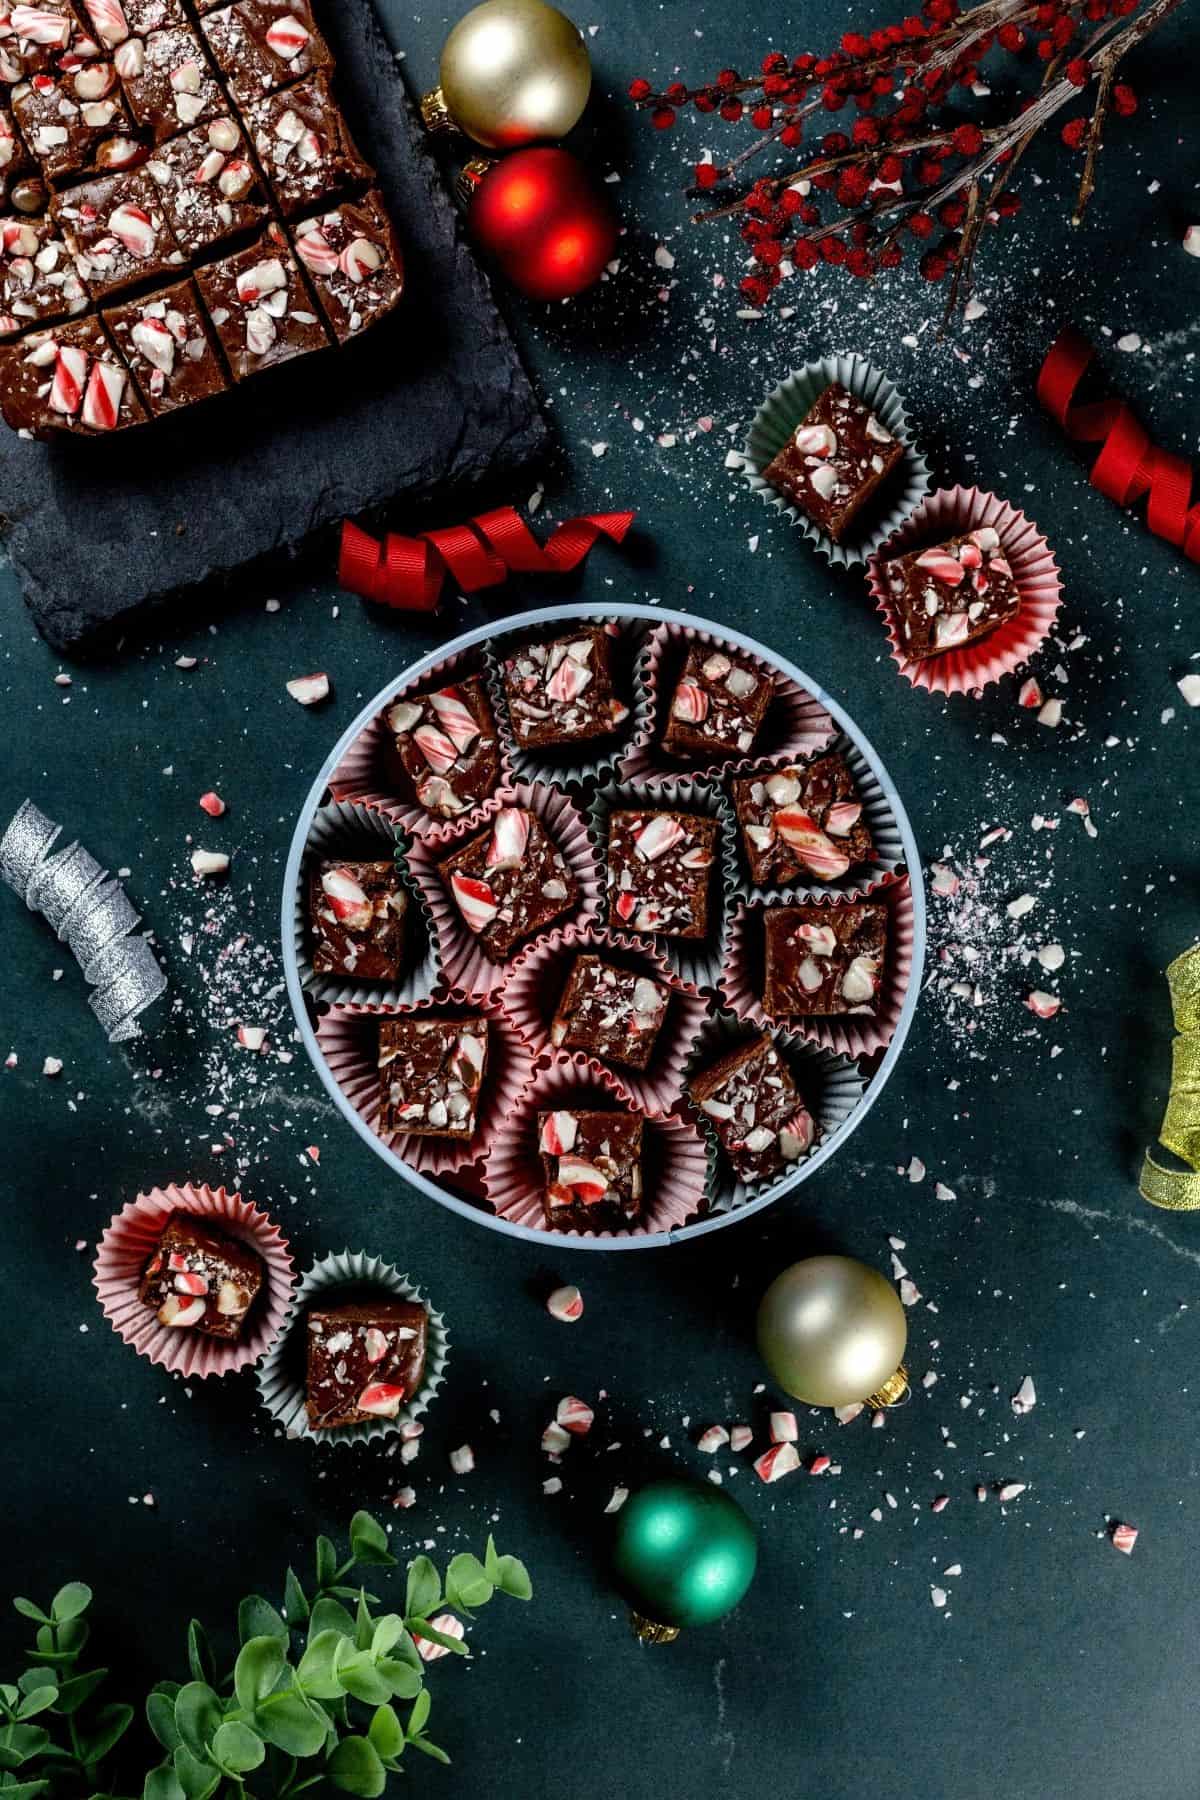 a round tin is filled with pieces of Christmas fudge covered in crushed candy canes. more pieces are scattered around the table, along with ribbons, more candy canes, and a few Christmas ornaments.